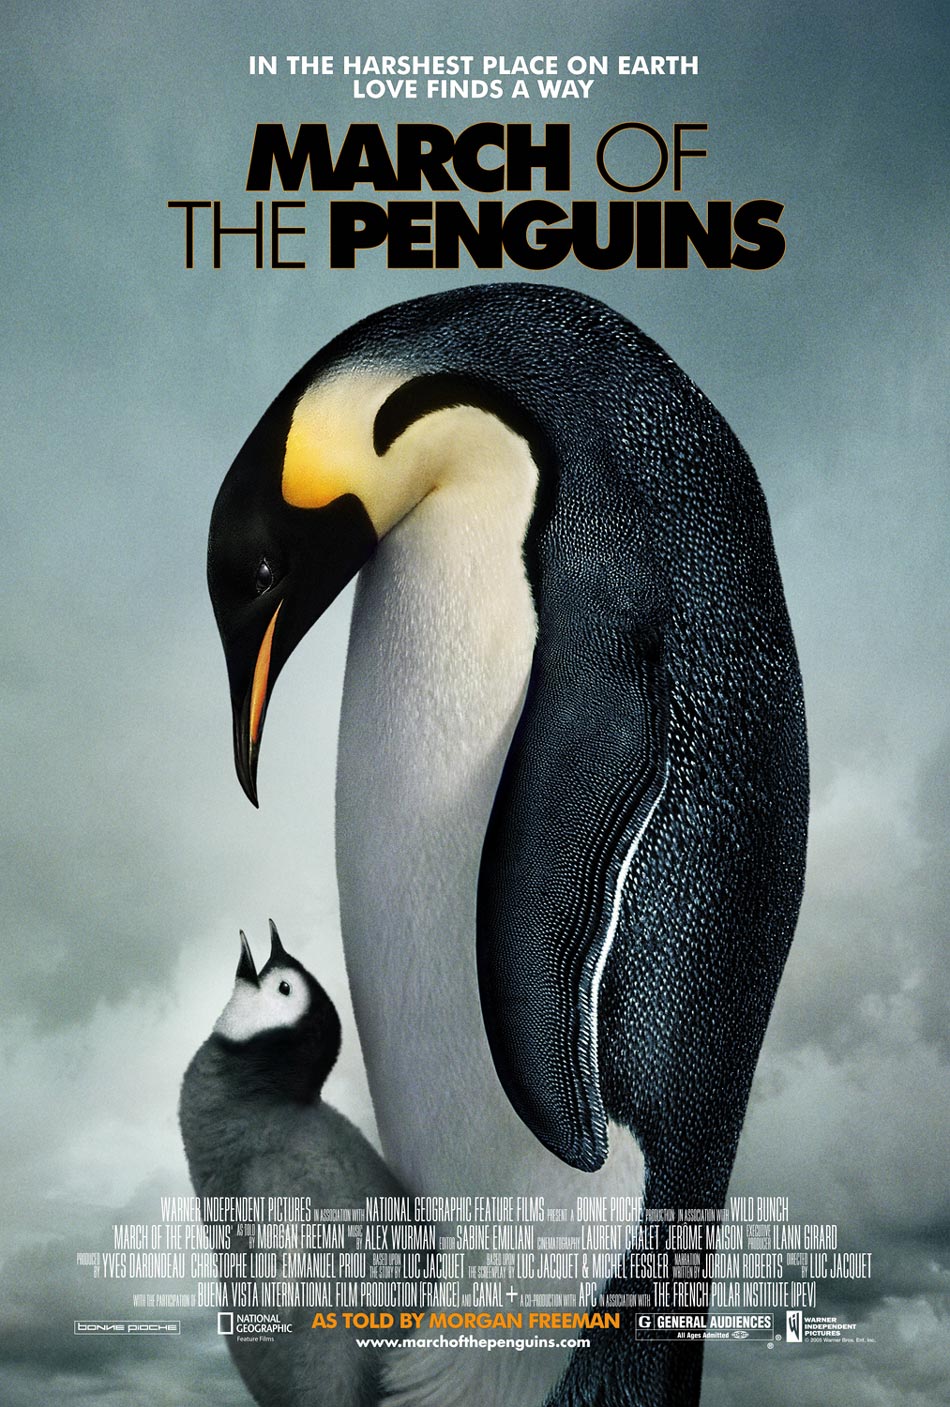 Pinguins info - penguin - information about films or movies with penguins